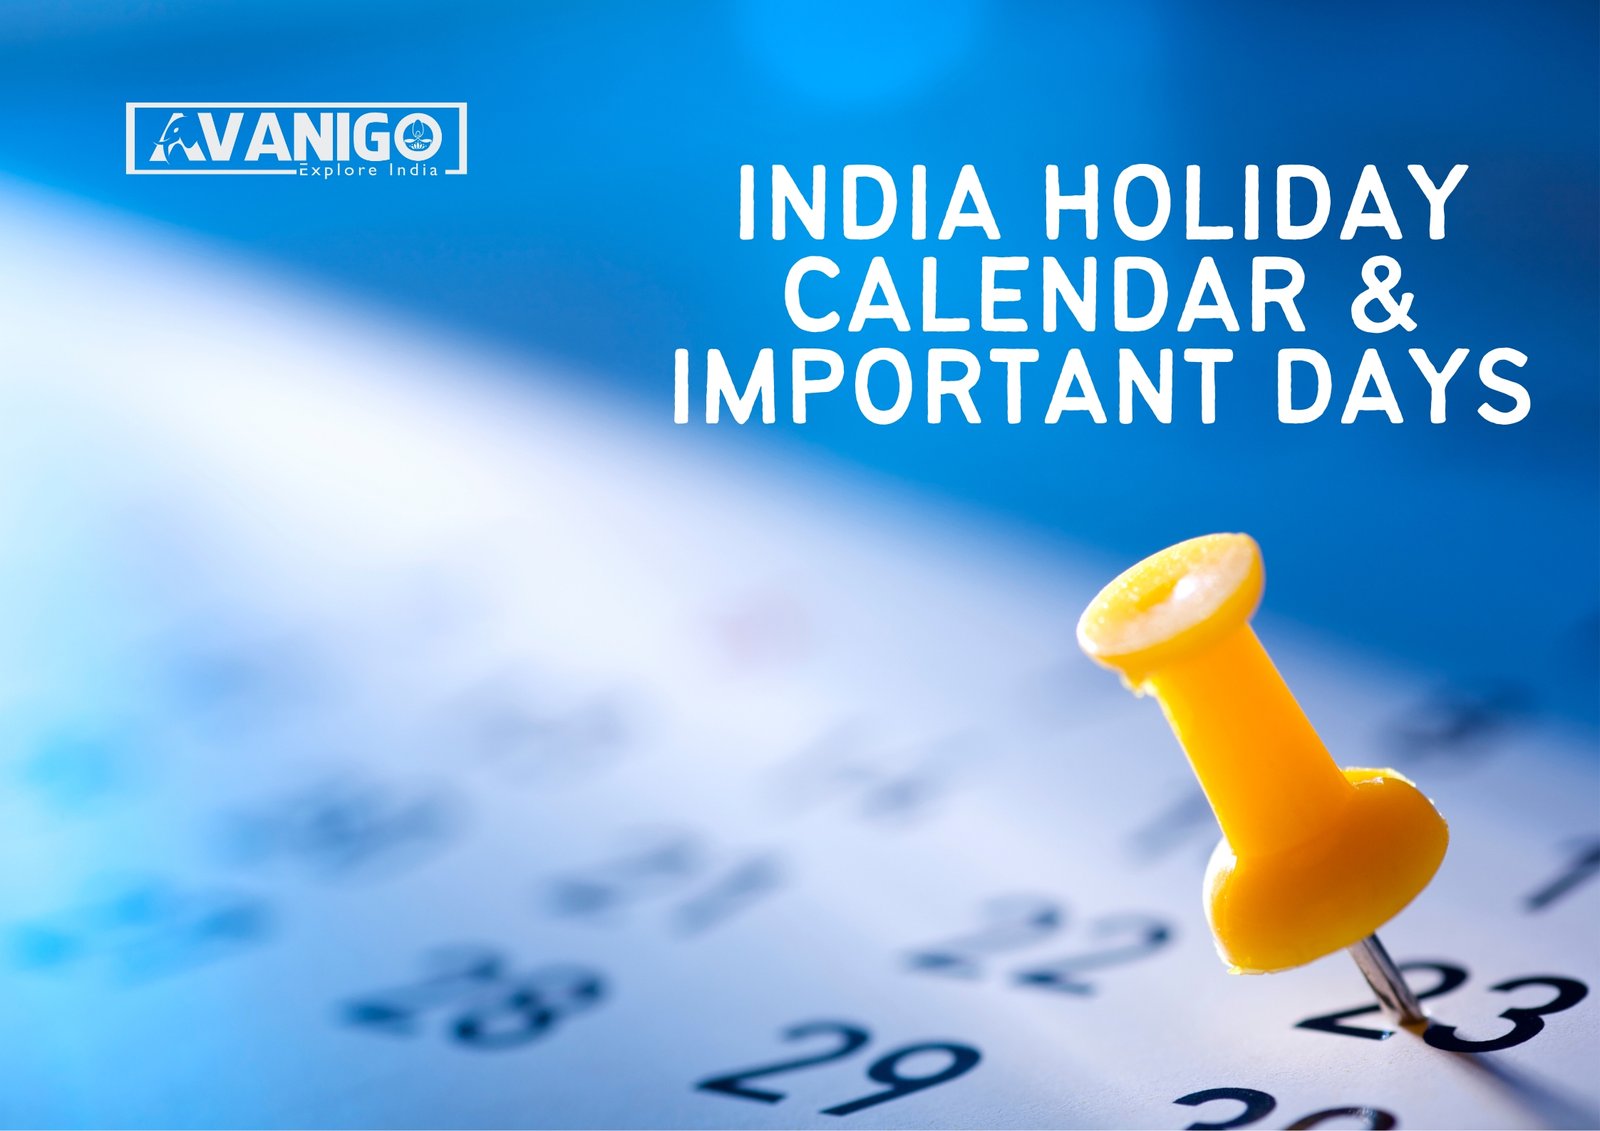 Important days in India list